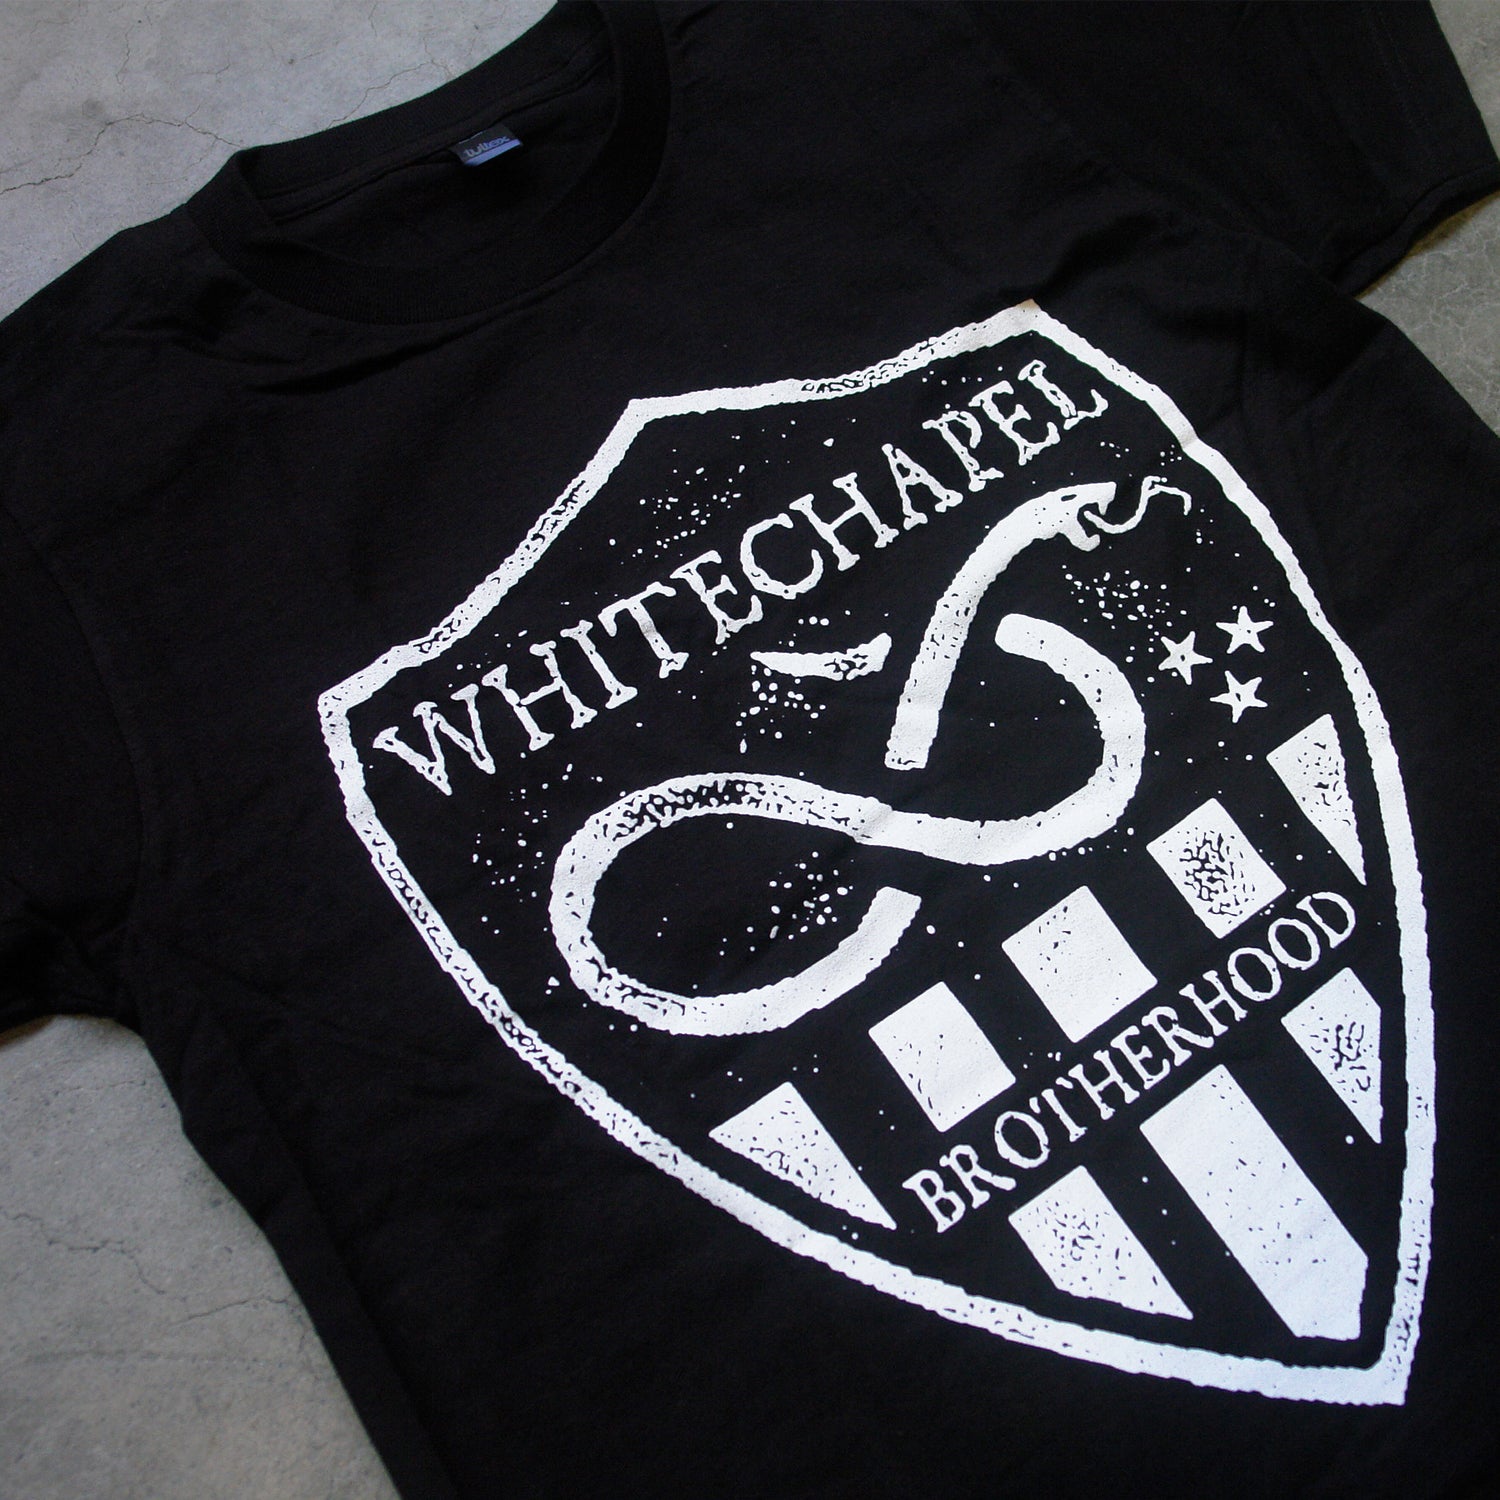 Image of a black tshirt against a grey concrete background. There is a graphic of a white badge on the shirt, inside this badge in white text reads "whitechapel". Below this is a graphic of a snake with its tongue out. There are three small stars next to the snake. Below this are white stripes, and in between the stripes in the middle reads "brotherhood".